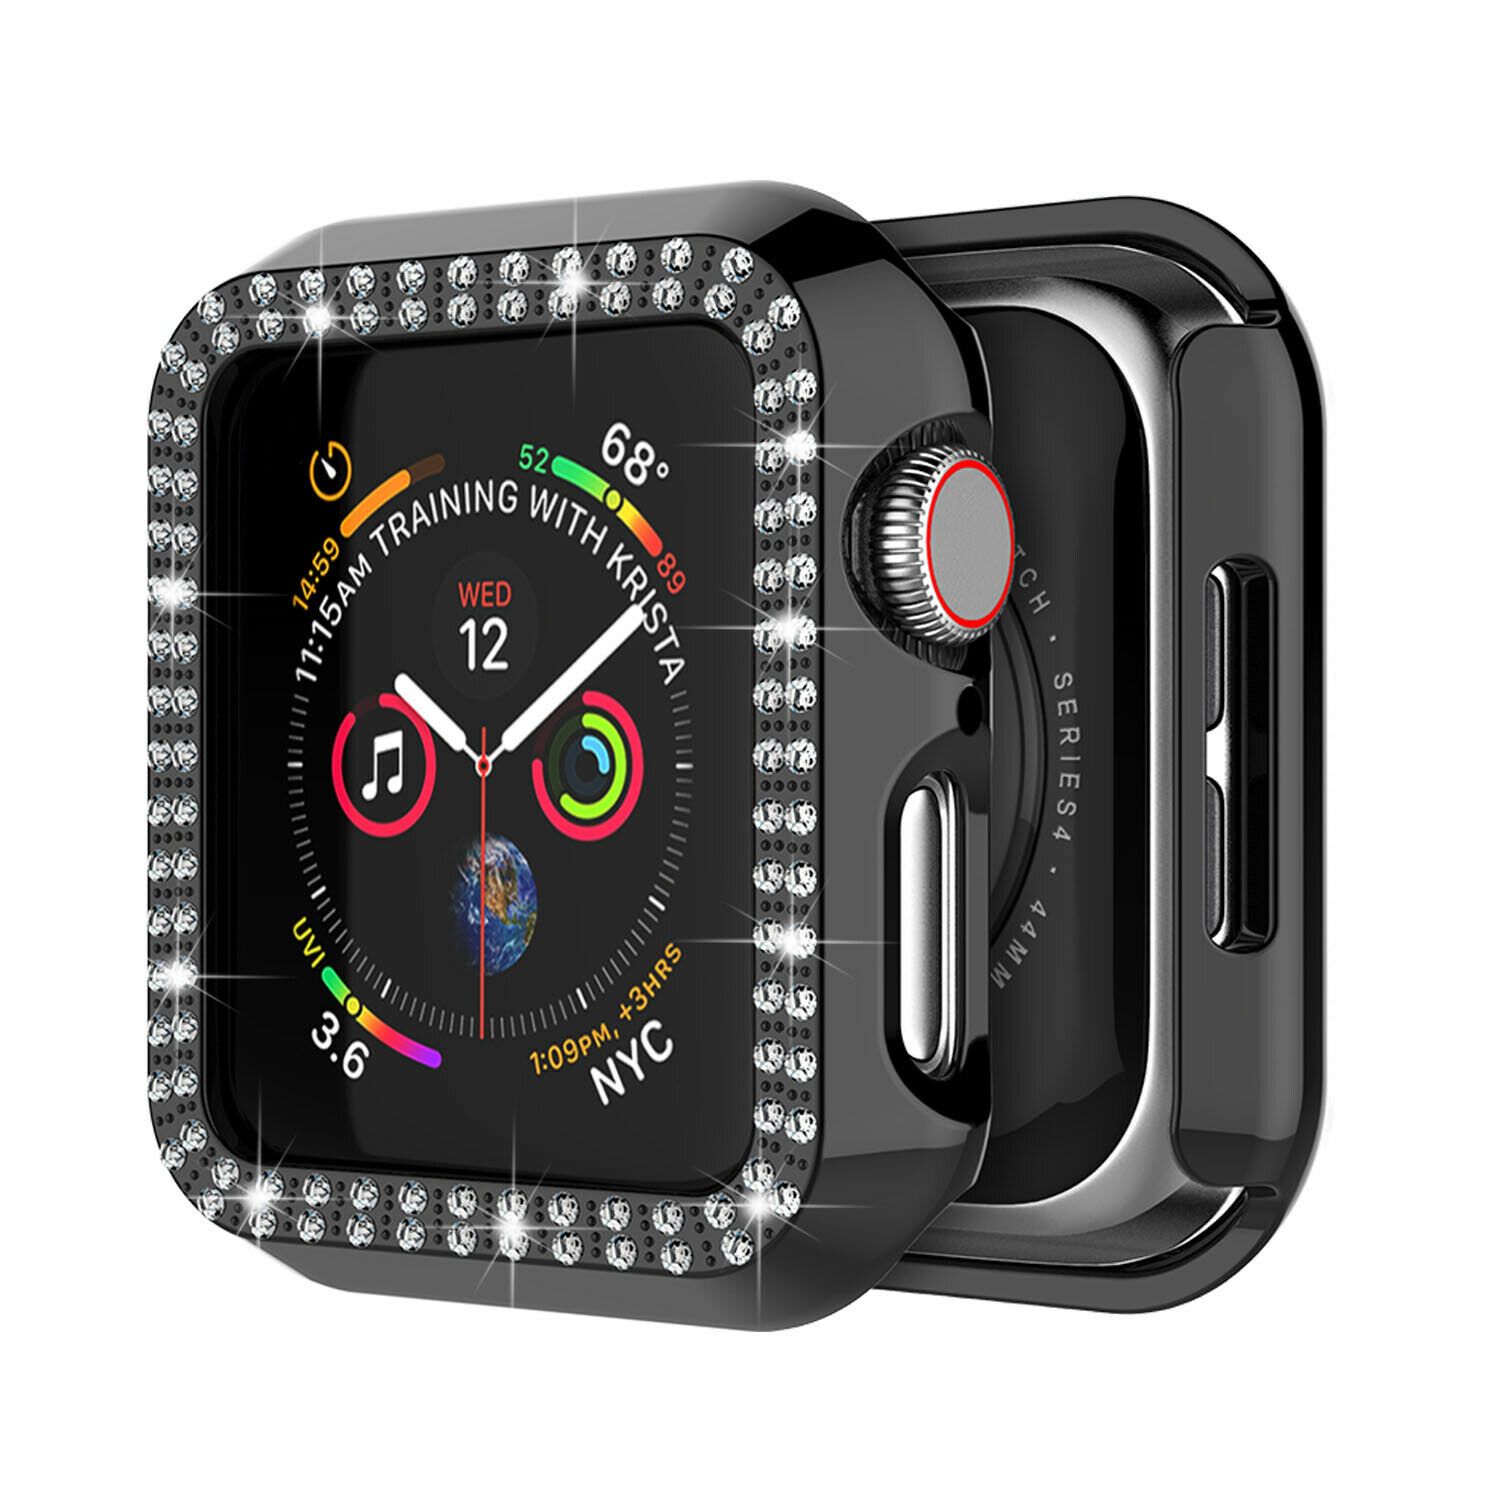 Crystal Diamond Protector Case Cover for Apple Watch 38/40/42/44 mm Series 5/4/3 ebizware Black 38mm (Series 3/2/1) 